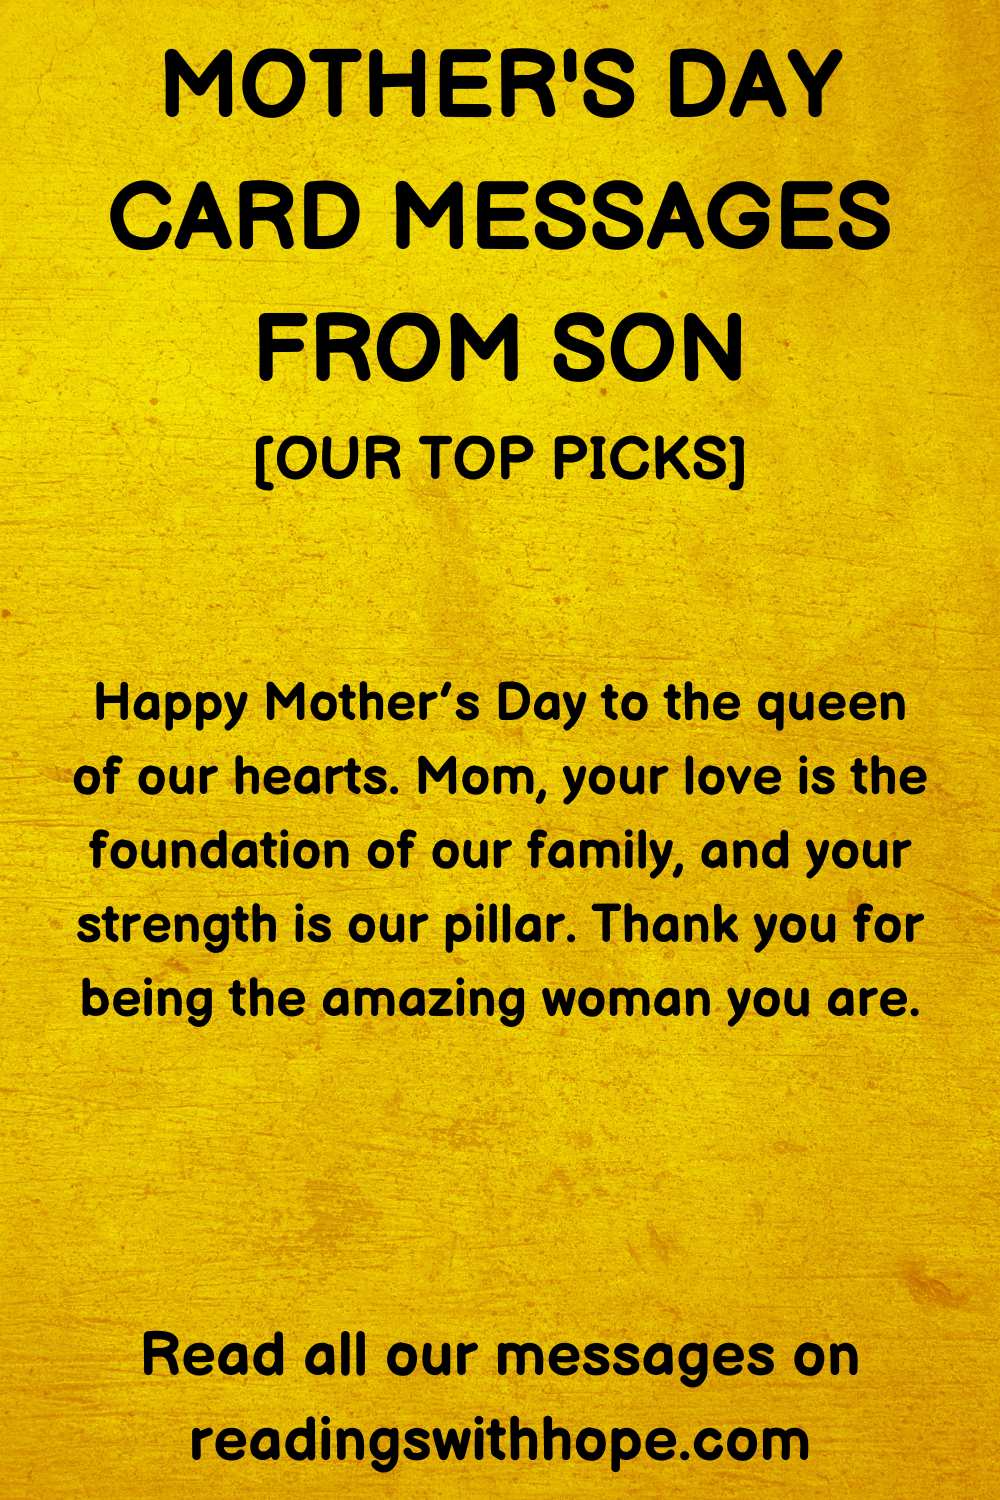 Mother's Day Card Message from son